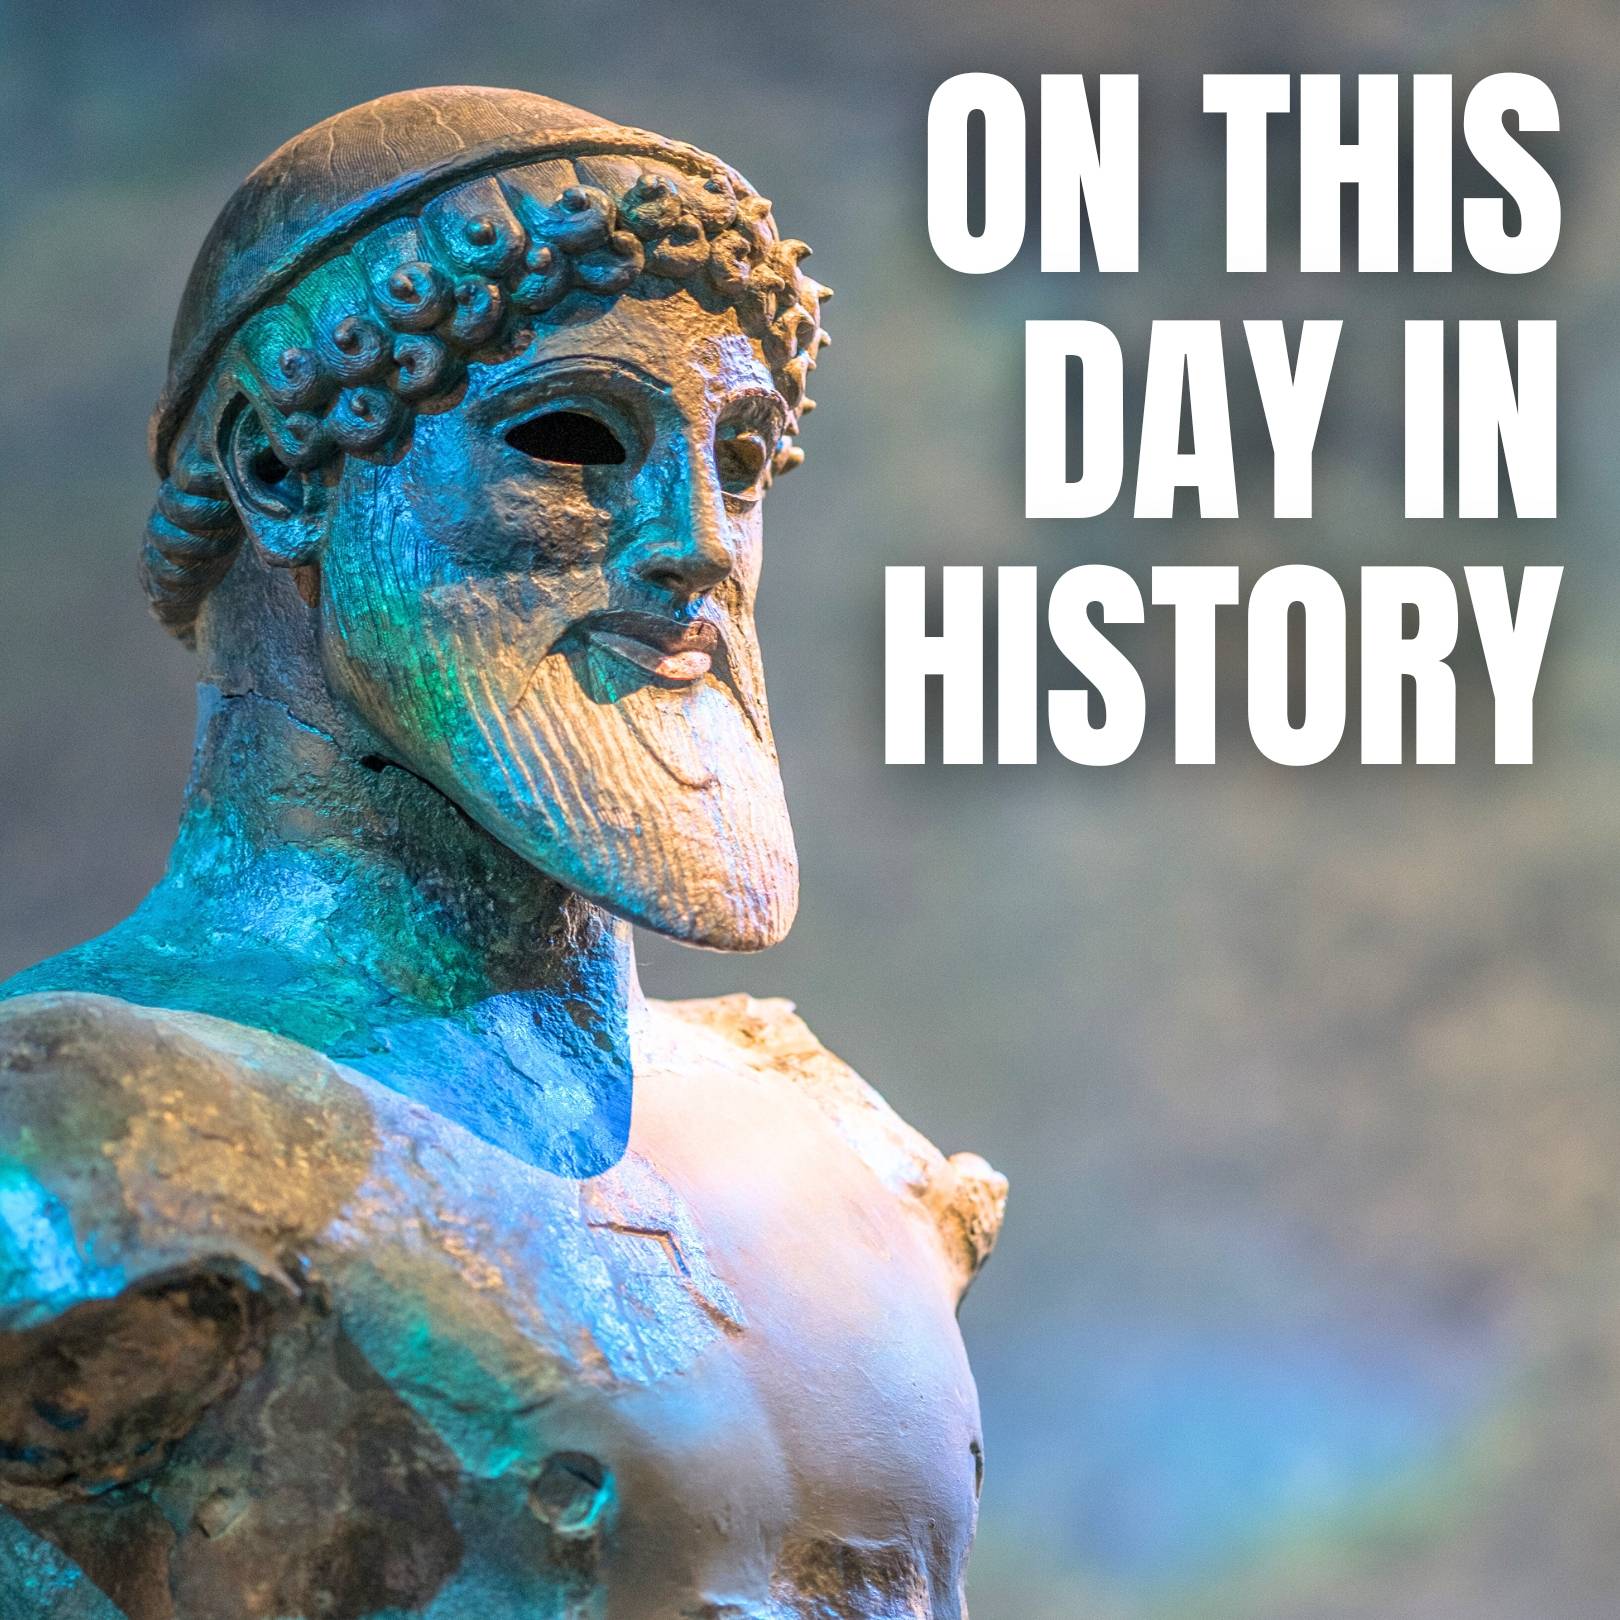 On this day in History